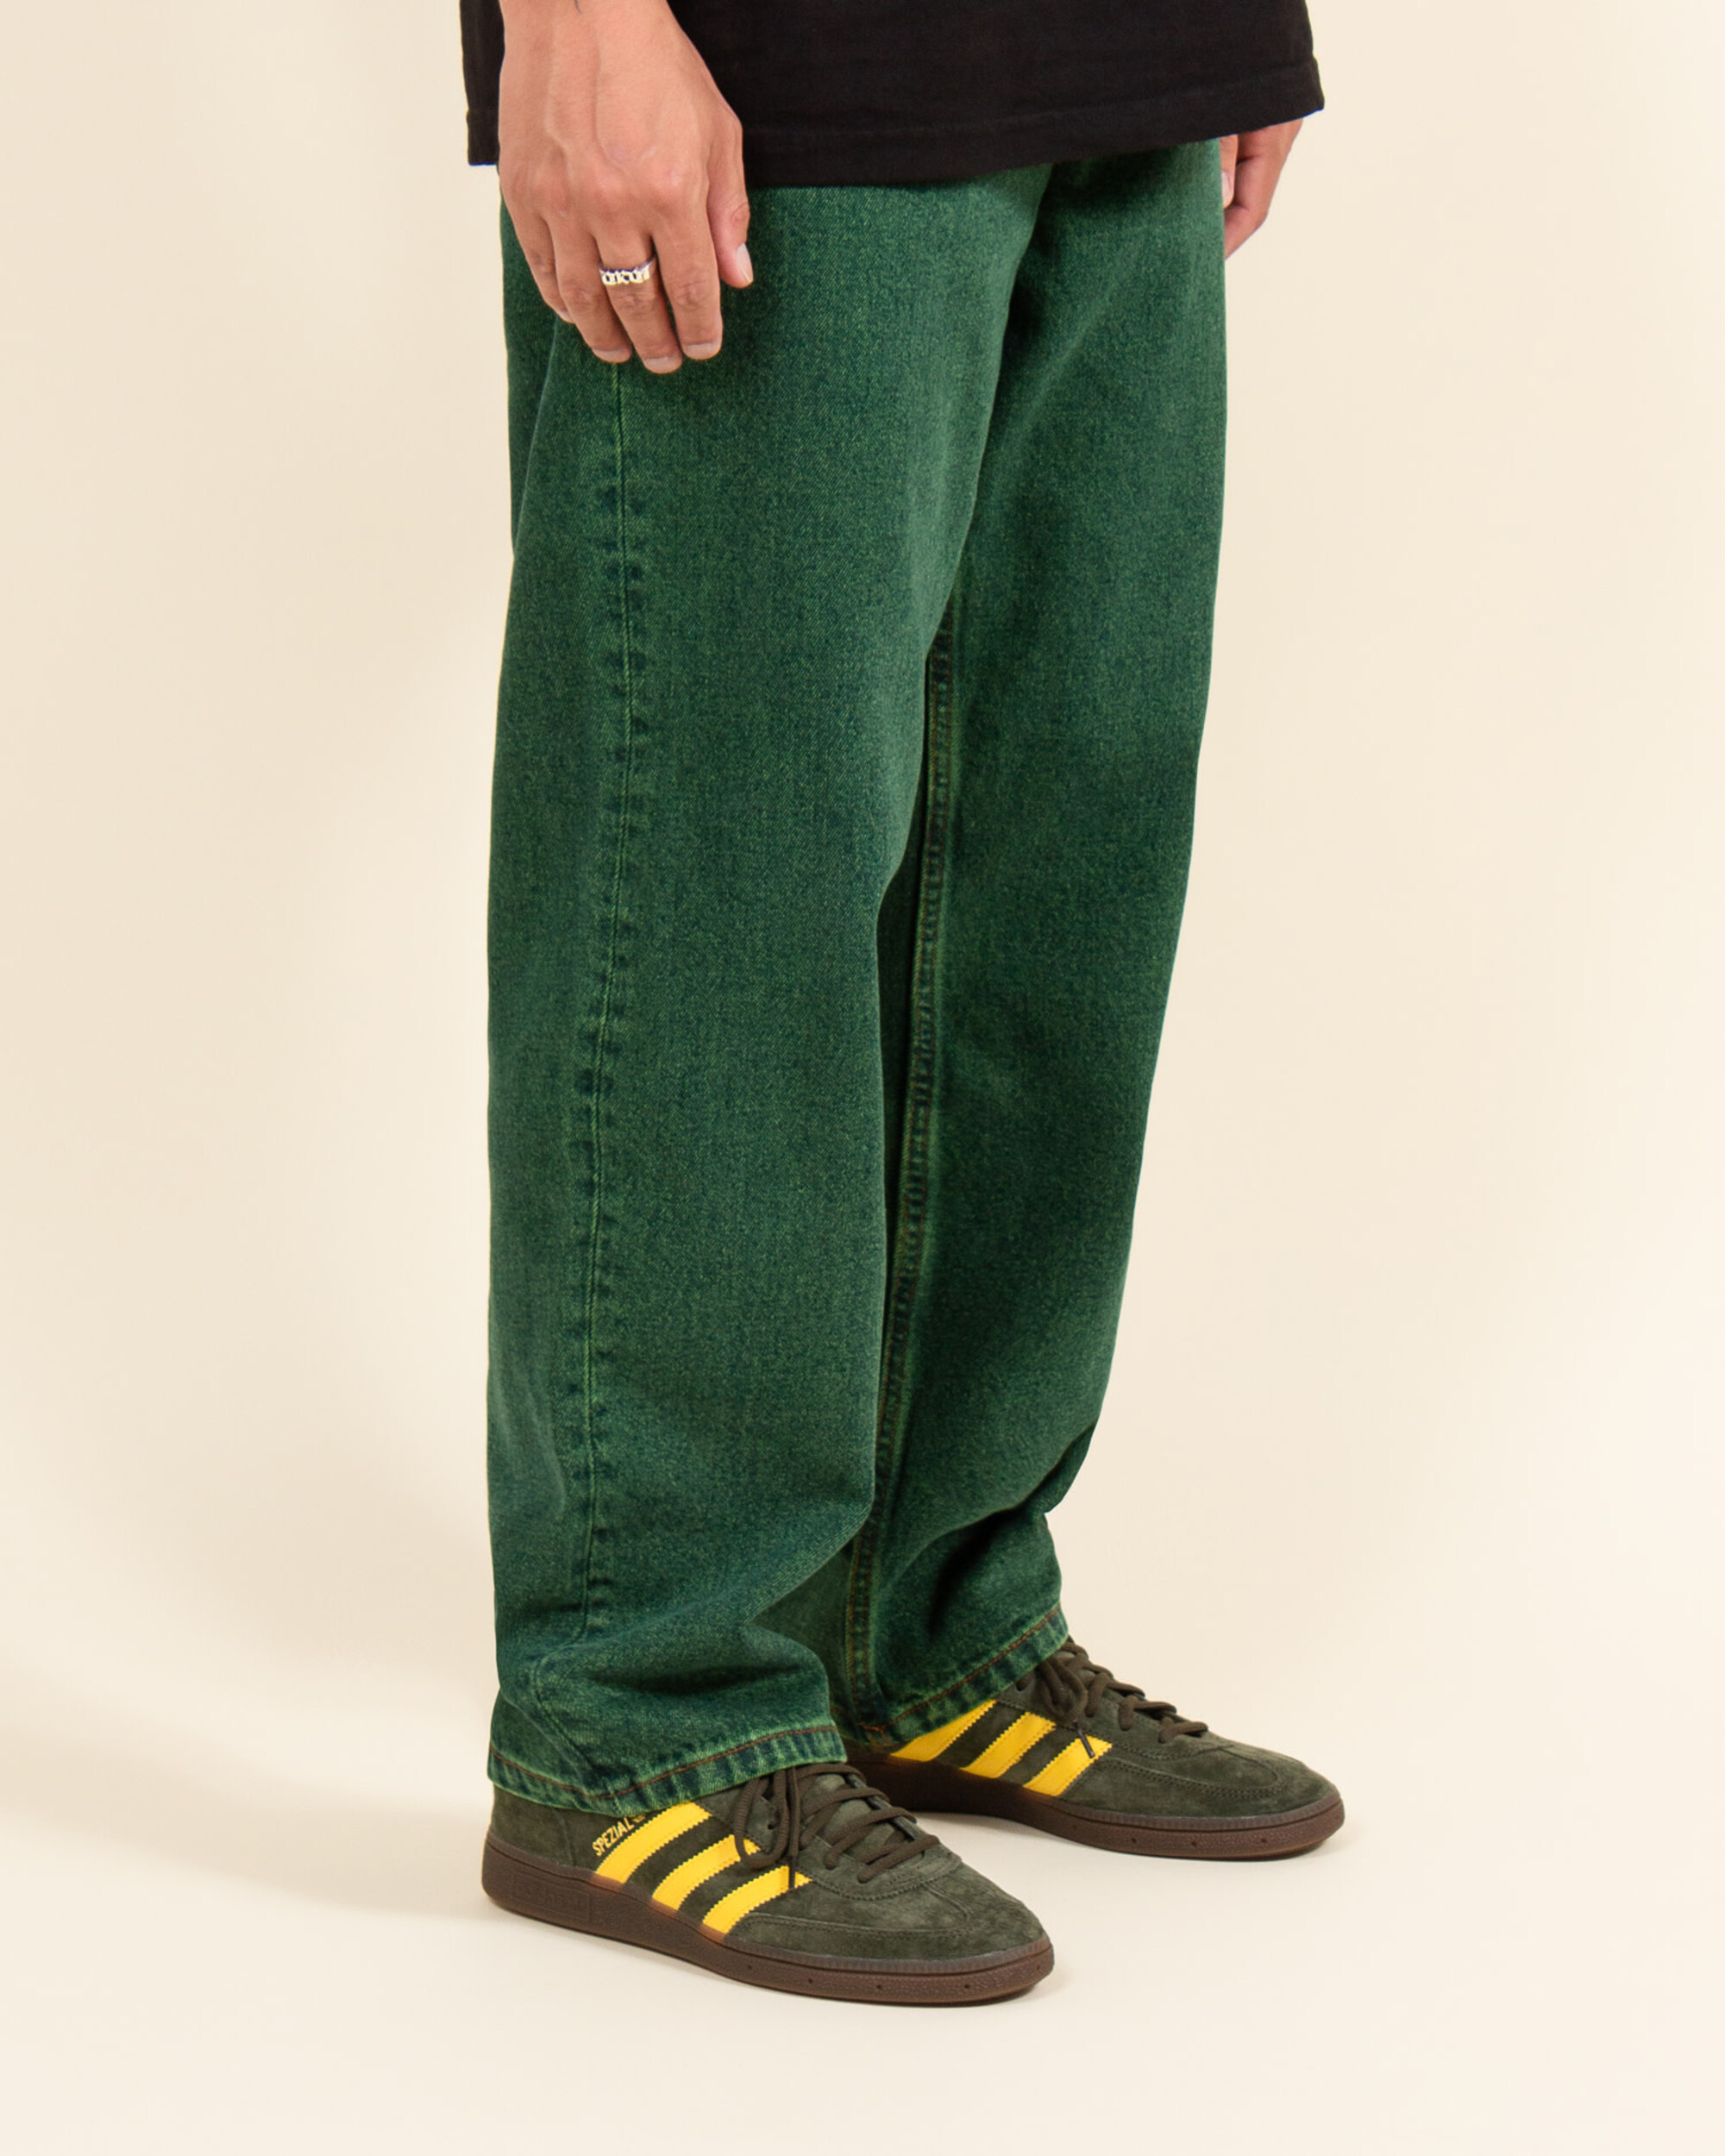 Lockwood Baggy Jeans - Poison Green